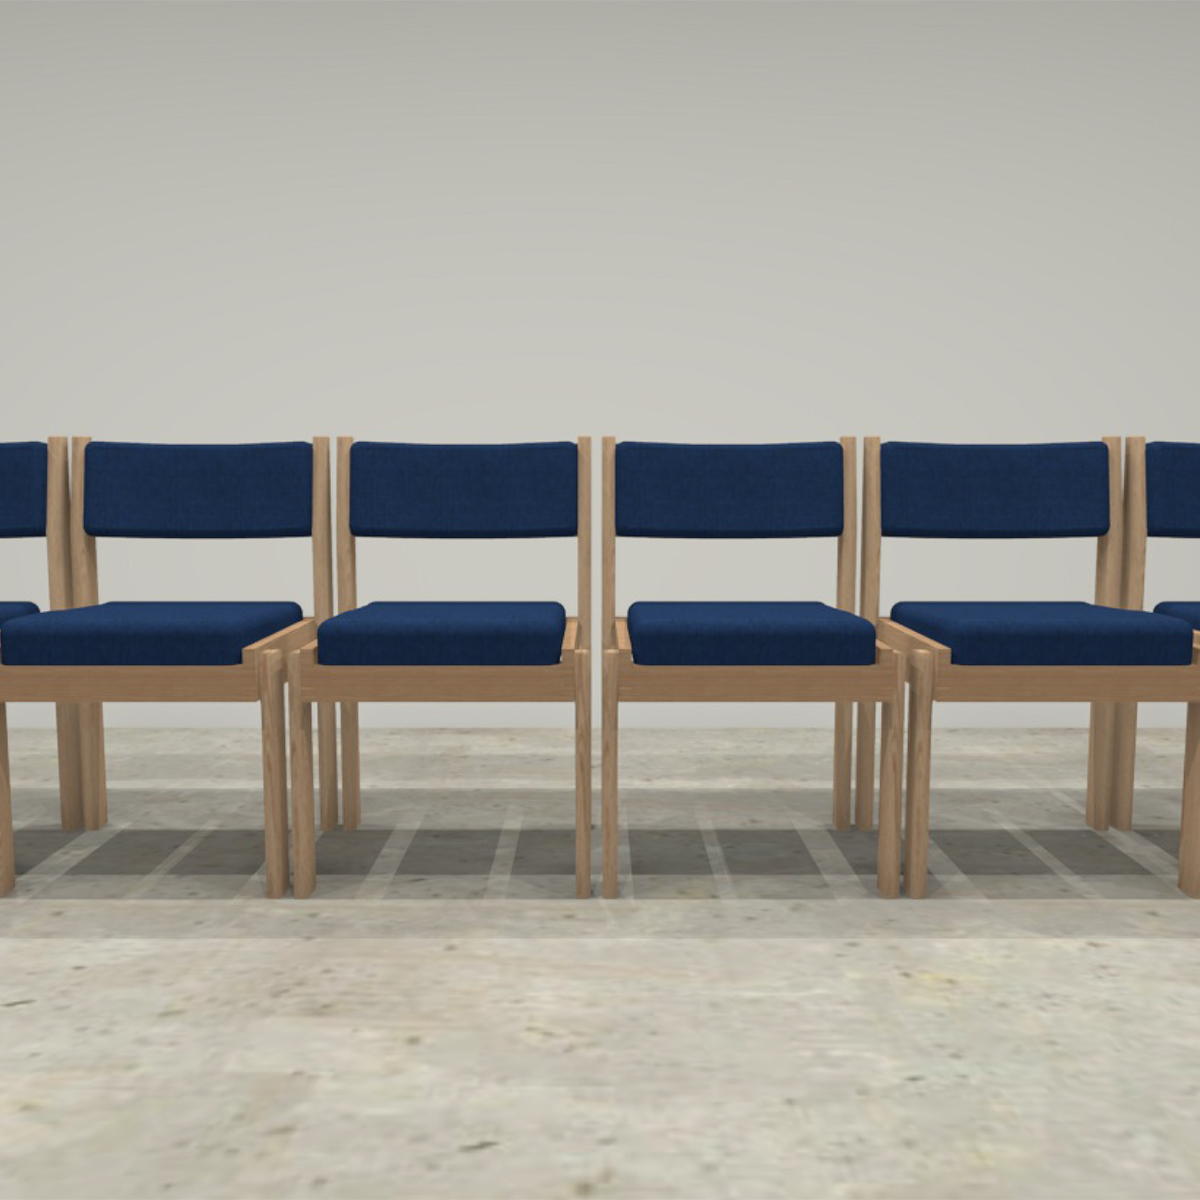 Design Assistance Rendering for St. Michaels Church - Canton, OH